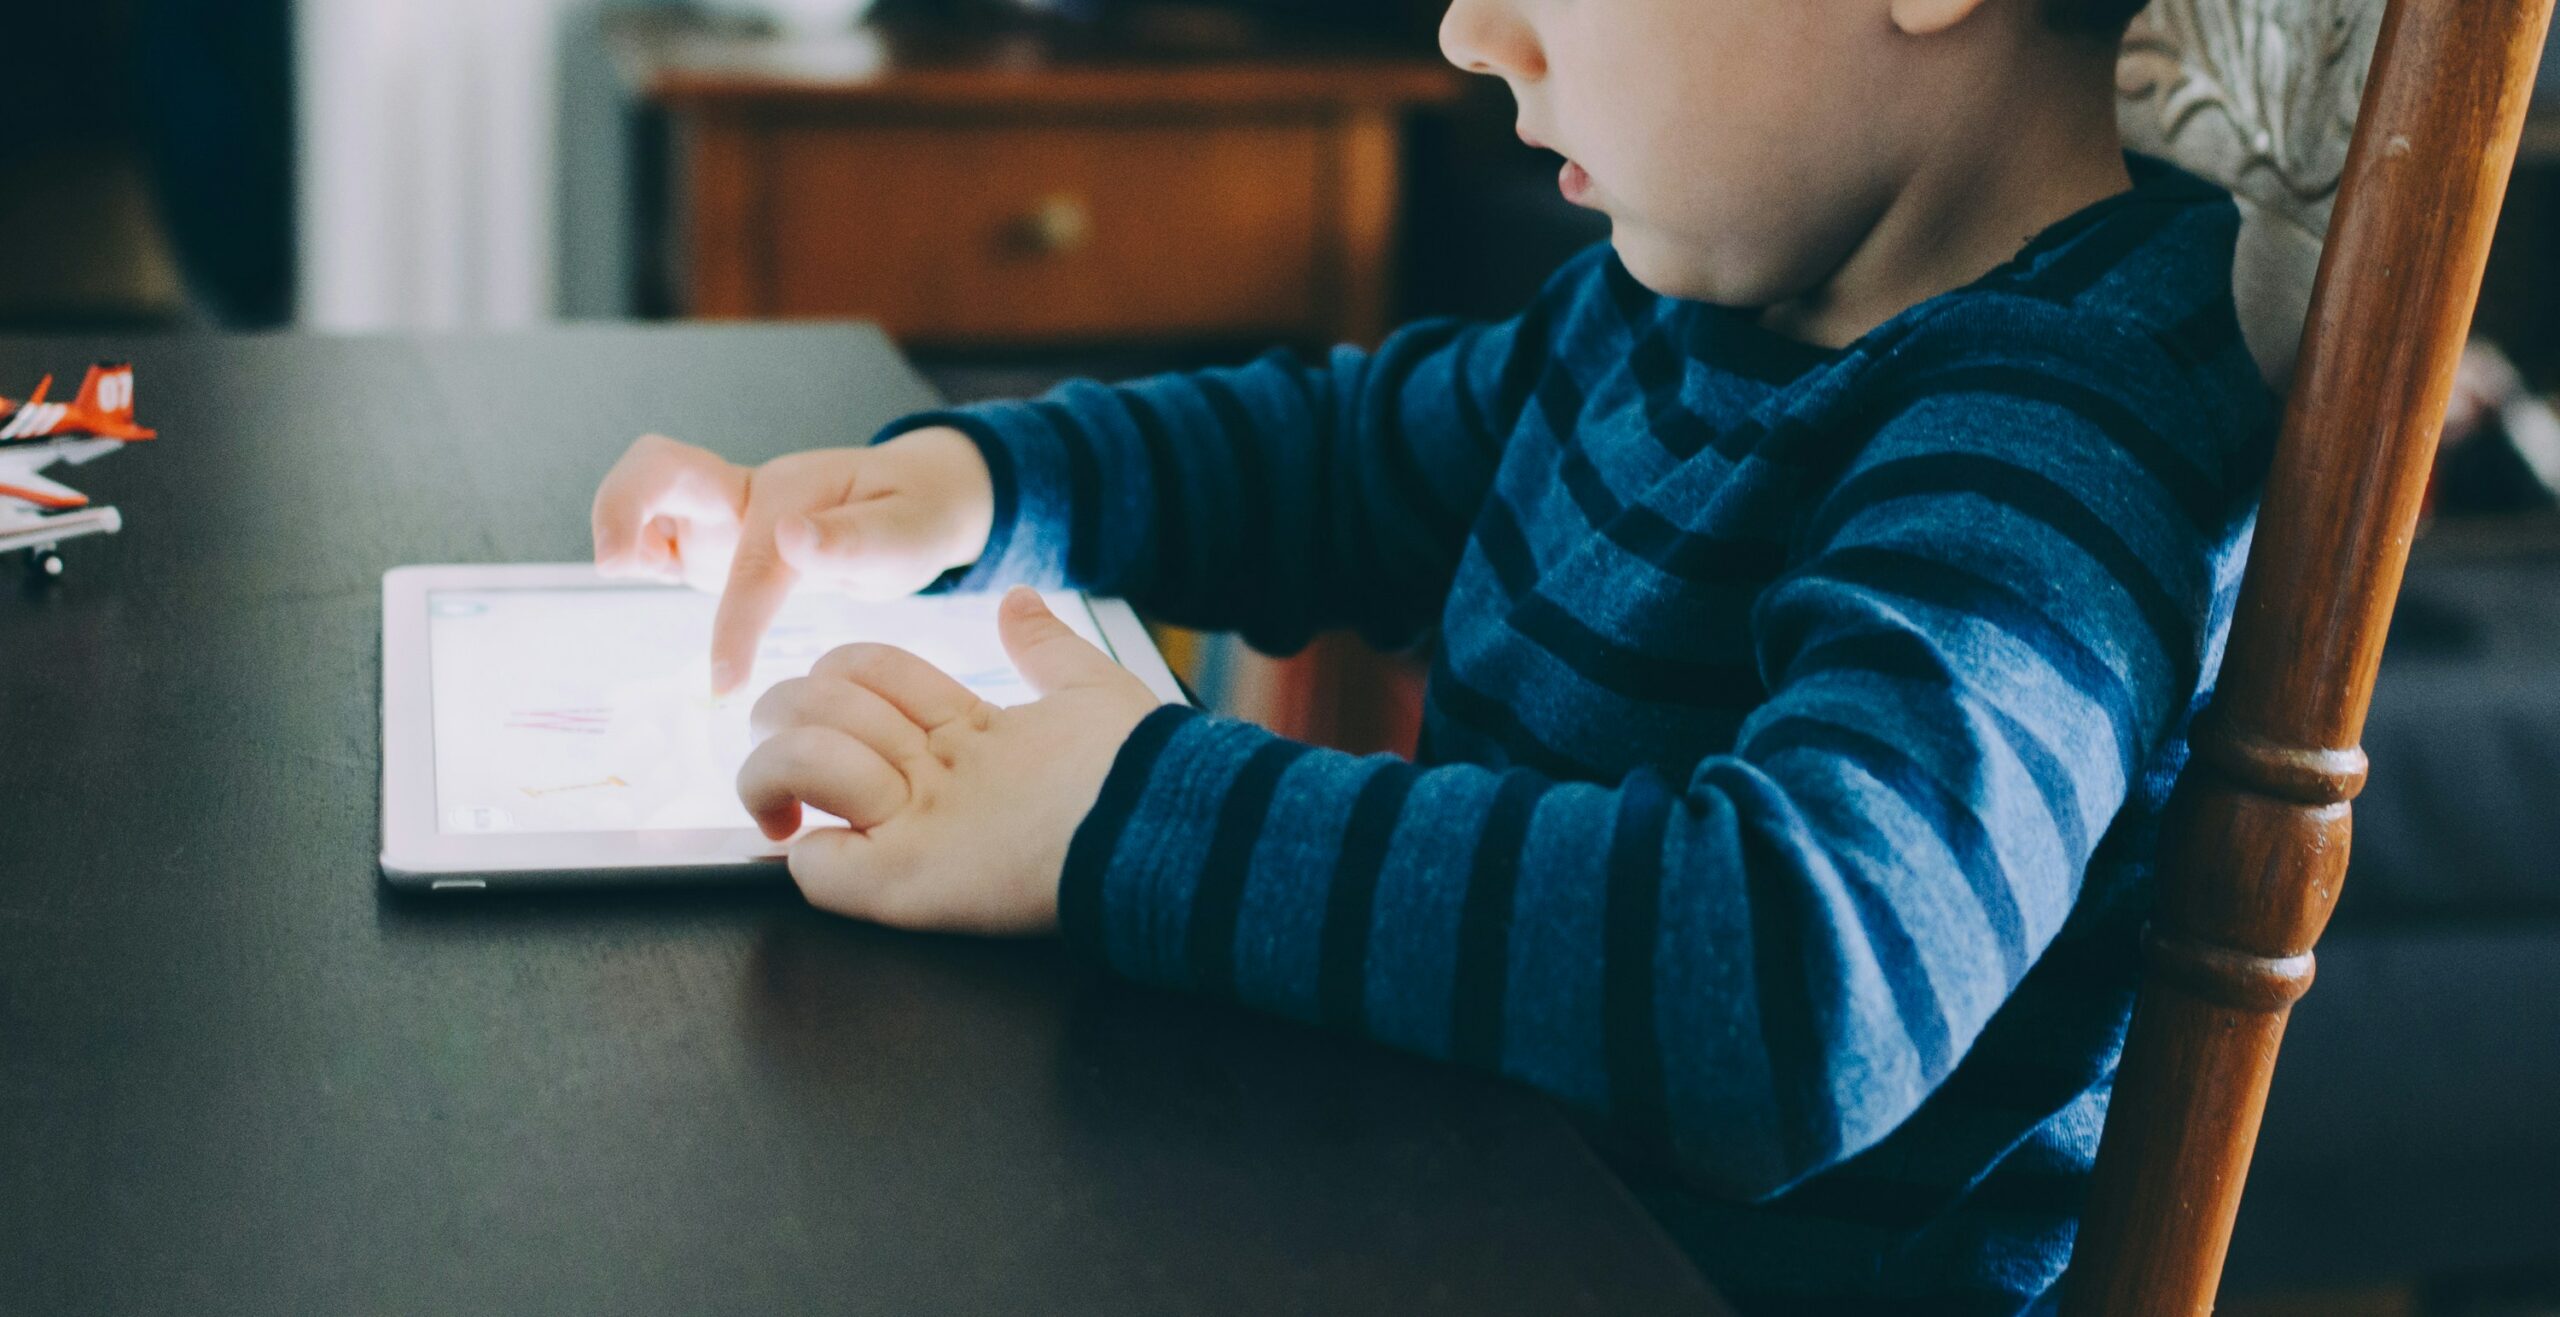 A young child, clad in a blue and dark striped sweater, is absorbed in a tablet, a scene that reflects the effects of kids' screen time. The child's fingers are poised on the touchscreen, illustrating the captivating nature of digital devices.